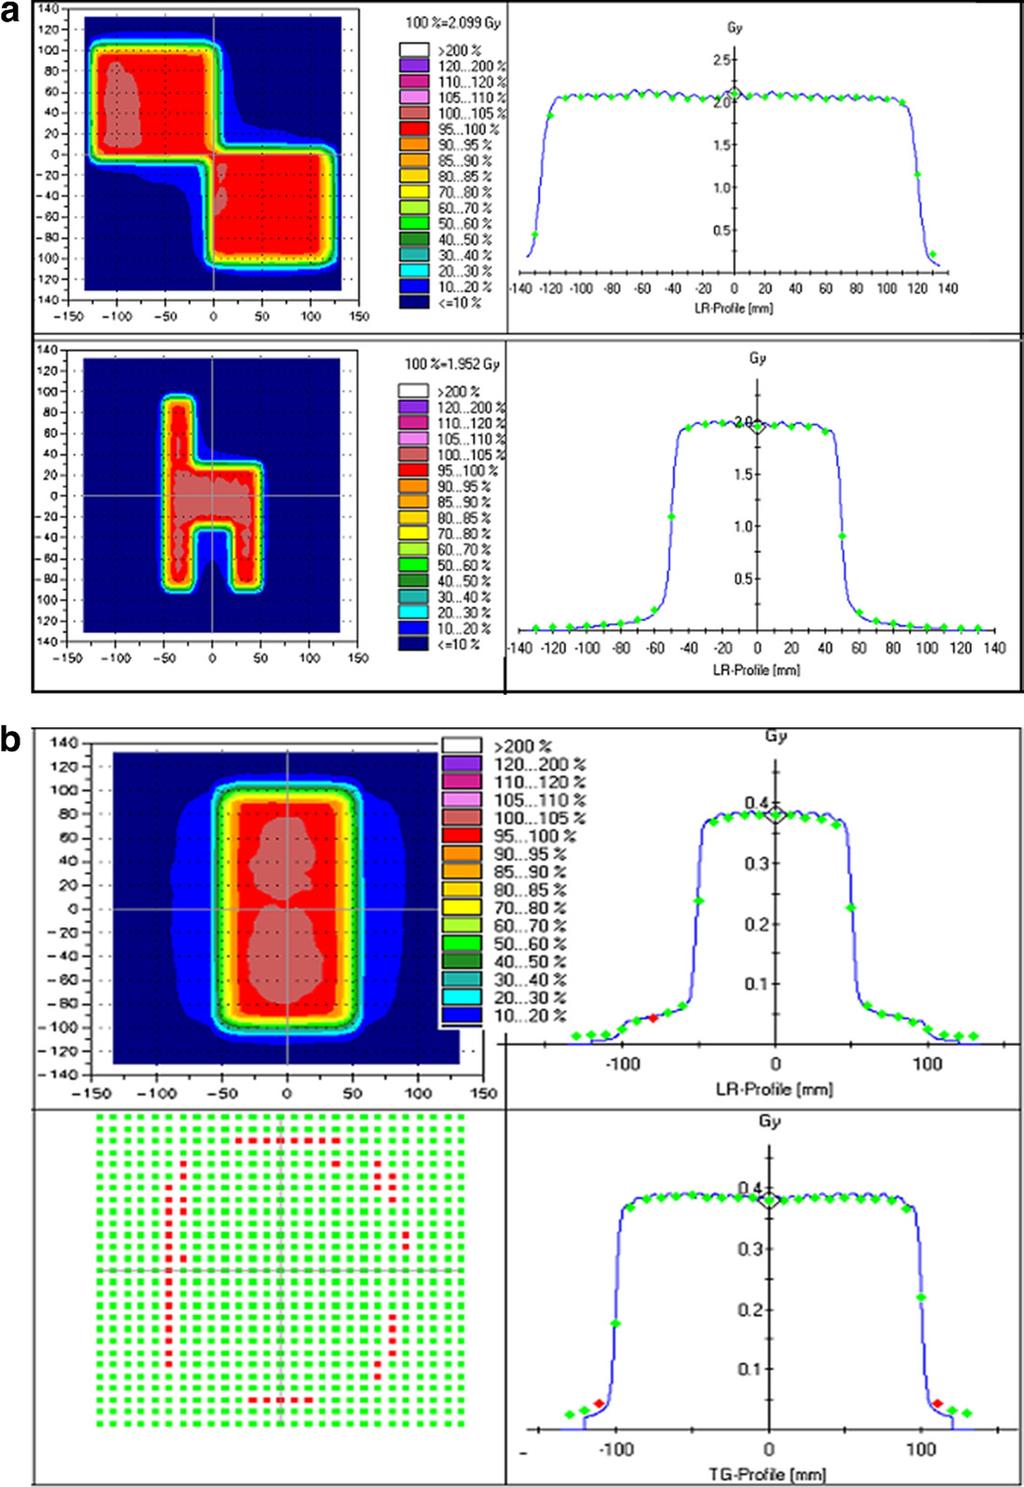 S. A. Syamkumar et al. / Medical Dosimetry 37 (2012) 53-60 59 Fig. 11. (a). MLC quality assurance test using 2D array. Gamma analysis for split fields and chair pattern test for MLC positions.